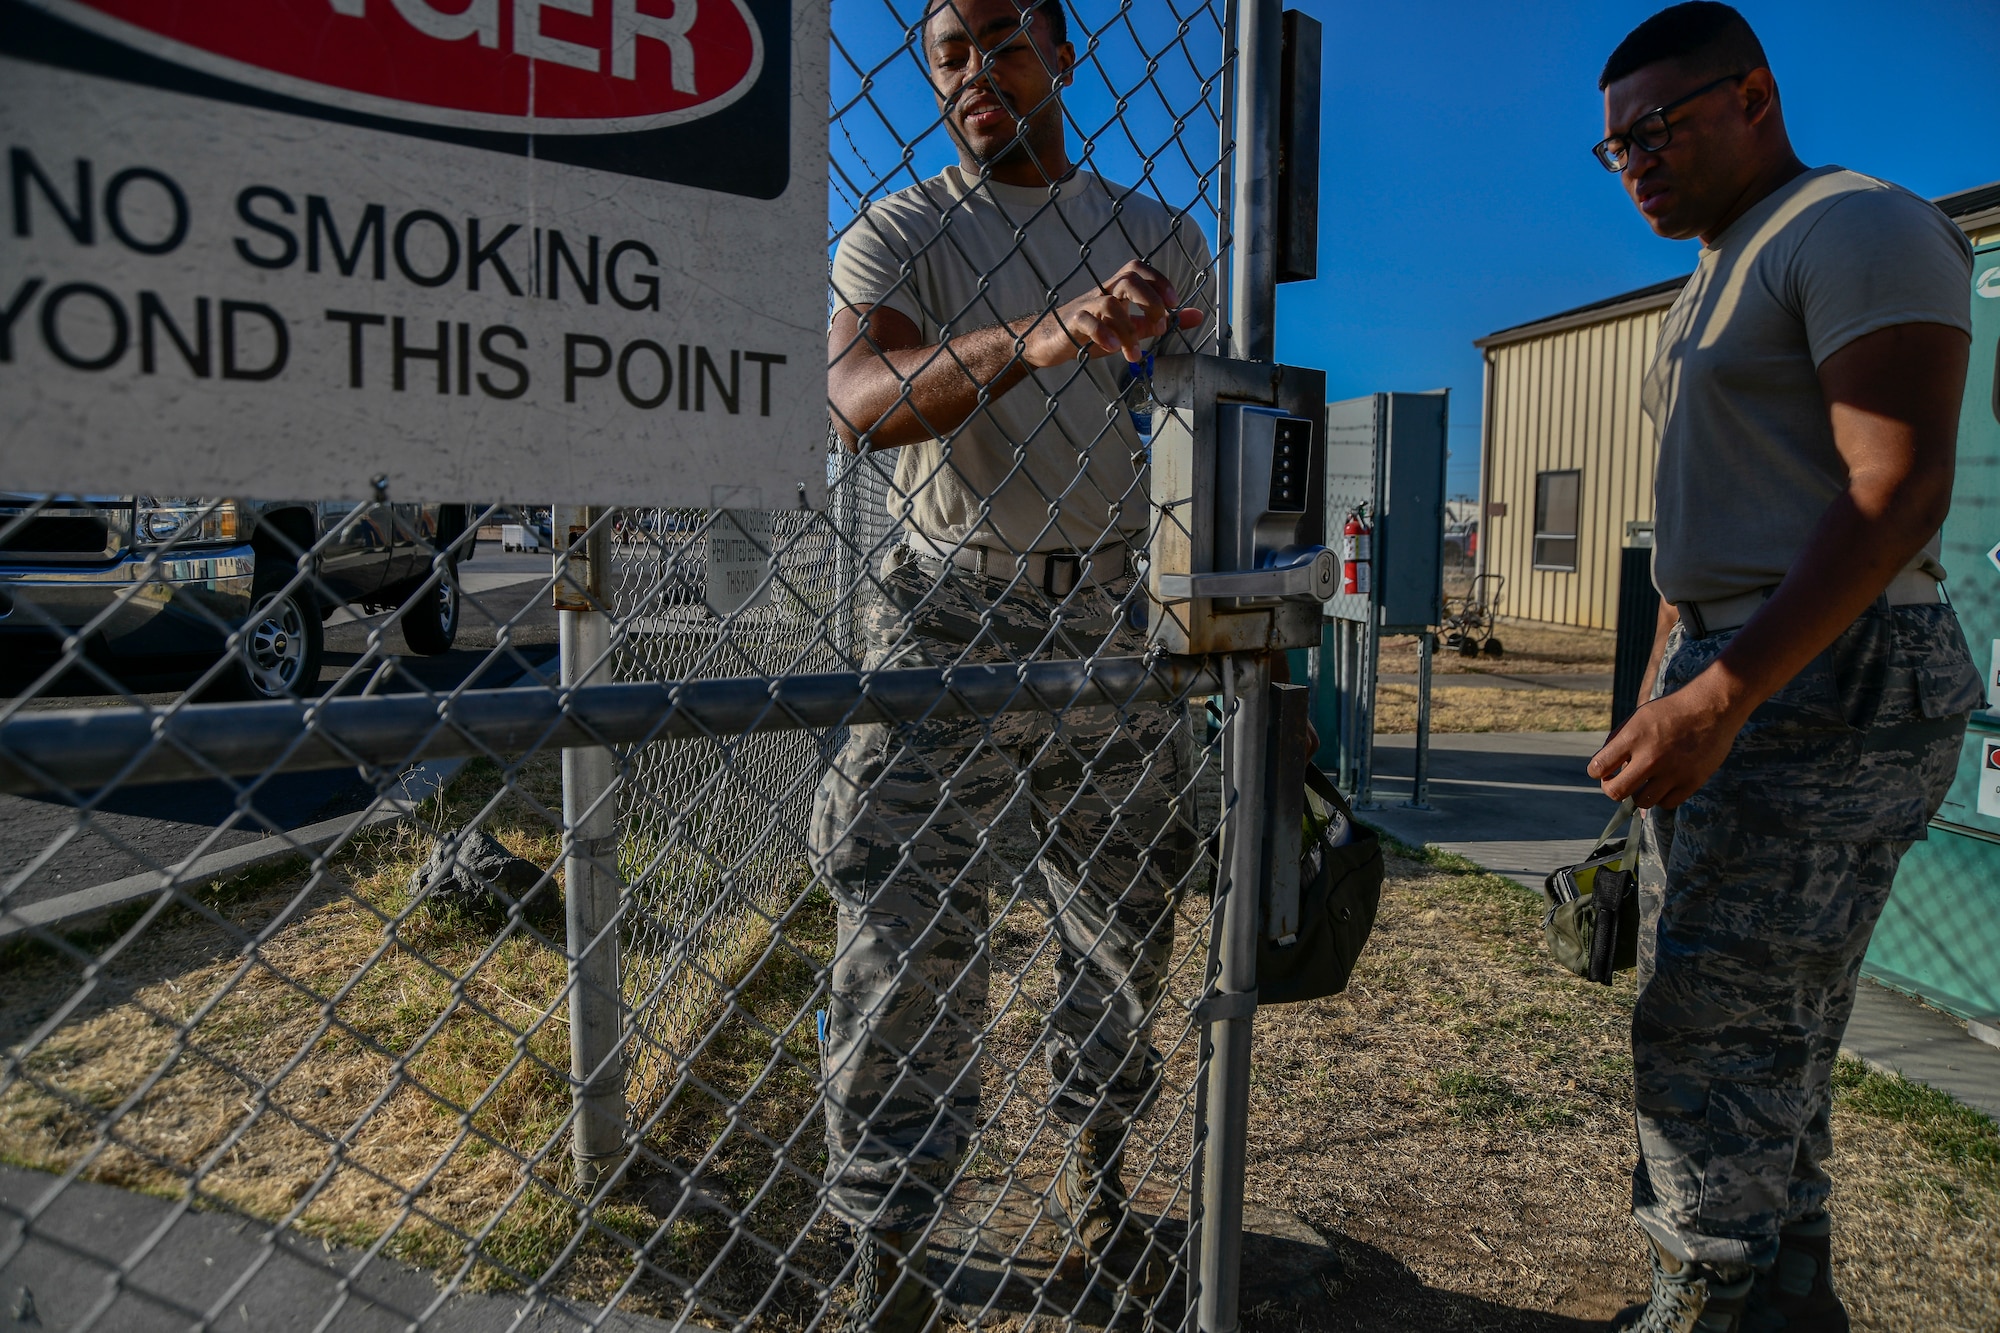 Airman 1st Class Tyrese Kirk and A1C Roderius Spearman, 9th Logistics Readiness Squadron Petroleum, Oil and Lubricants fuels distribution system operators, walk to their fuel trucks during a refueling exercise September 6, 2019 at Beale Air Force Base, California. (U.S. Air Force photo by Tech. Sgt. Alexandre Montes)